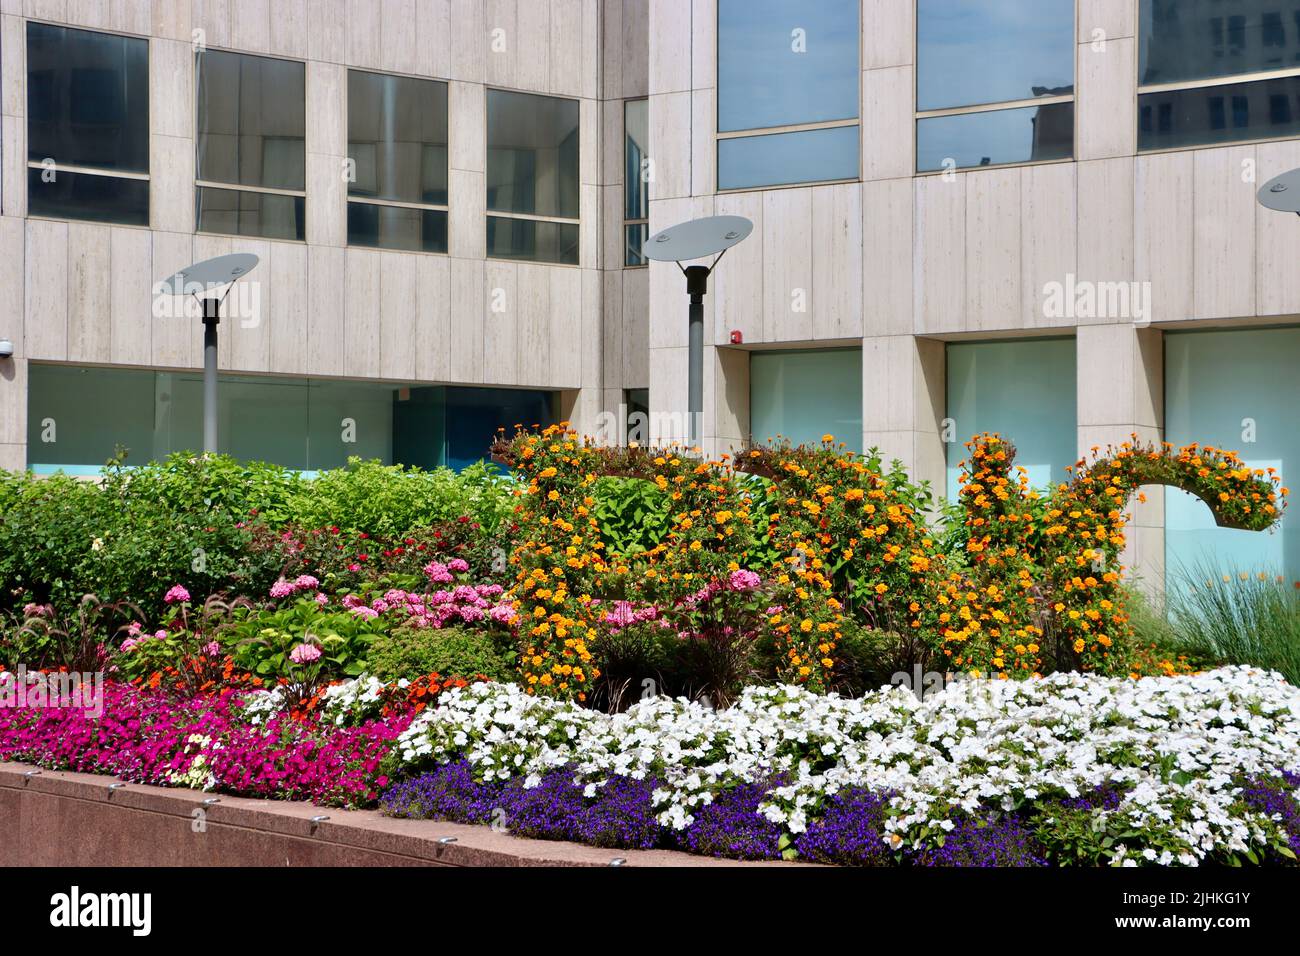 Street garden in front of PNC Bank building on Euclid Avenue in Cleveland, June 2022 Stock Photo